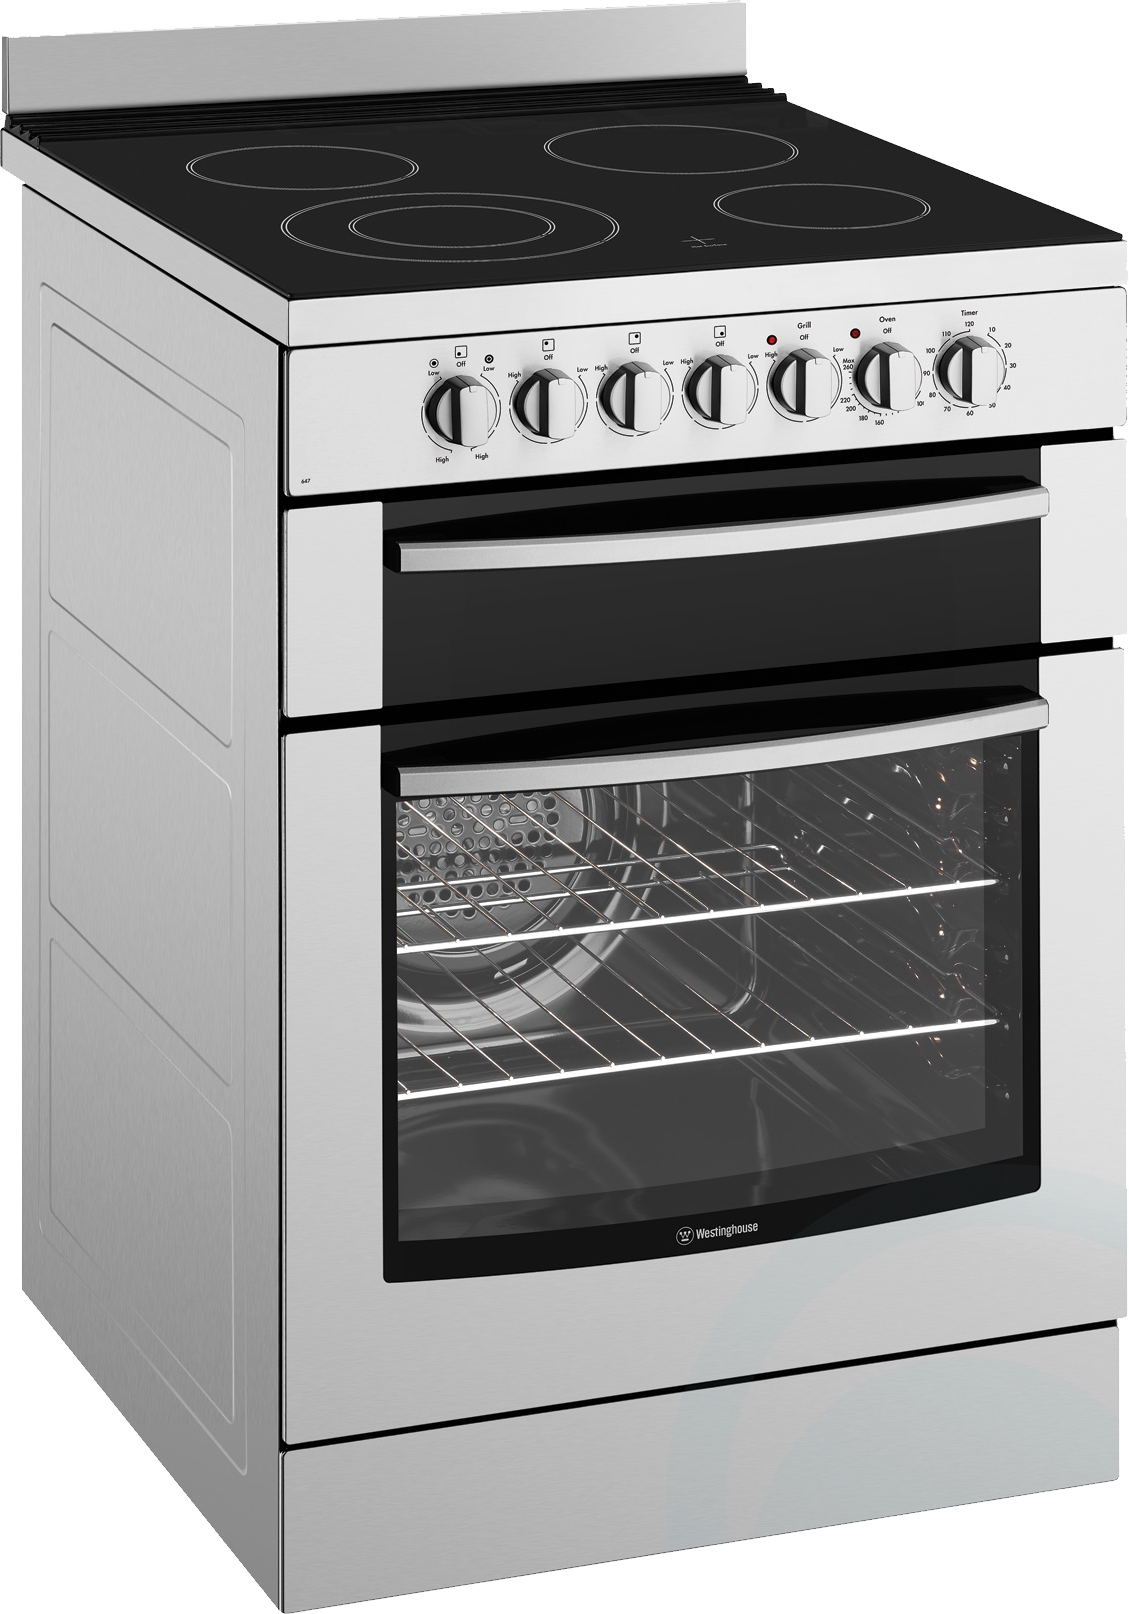 Stove PNG images, electric stove PNG.